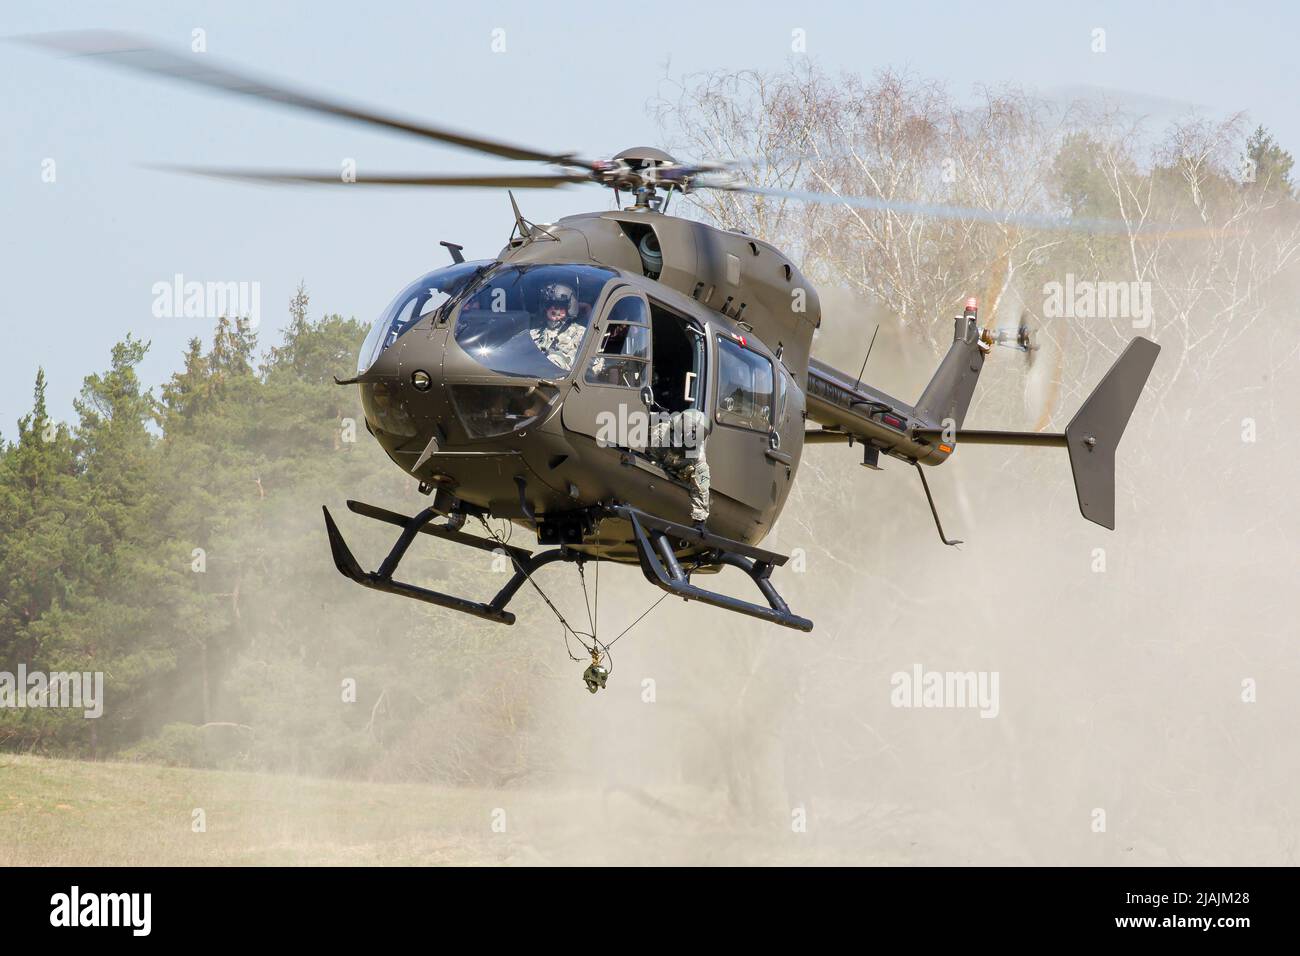 A U.S. Army UH-72 Lakota helicopter landing at the Hohenfels training area in Germany. Stock Photo